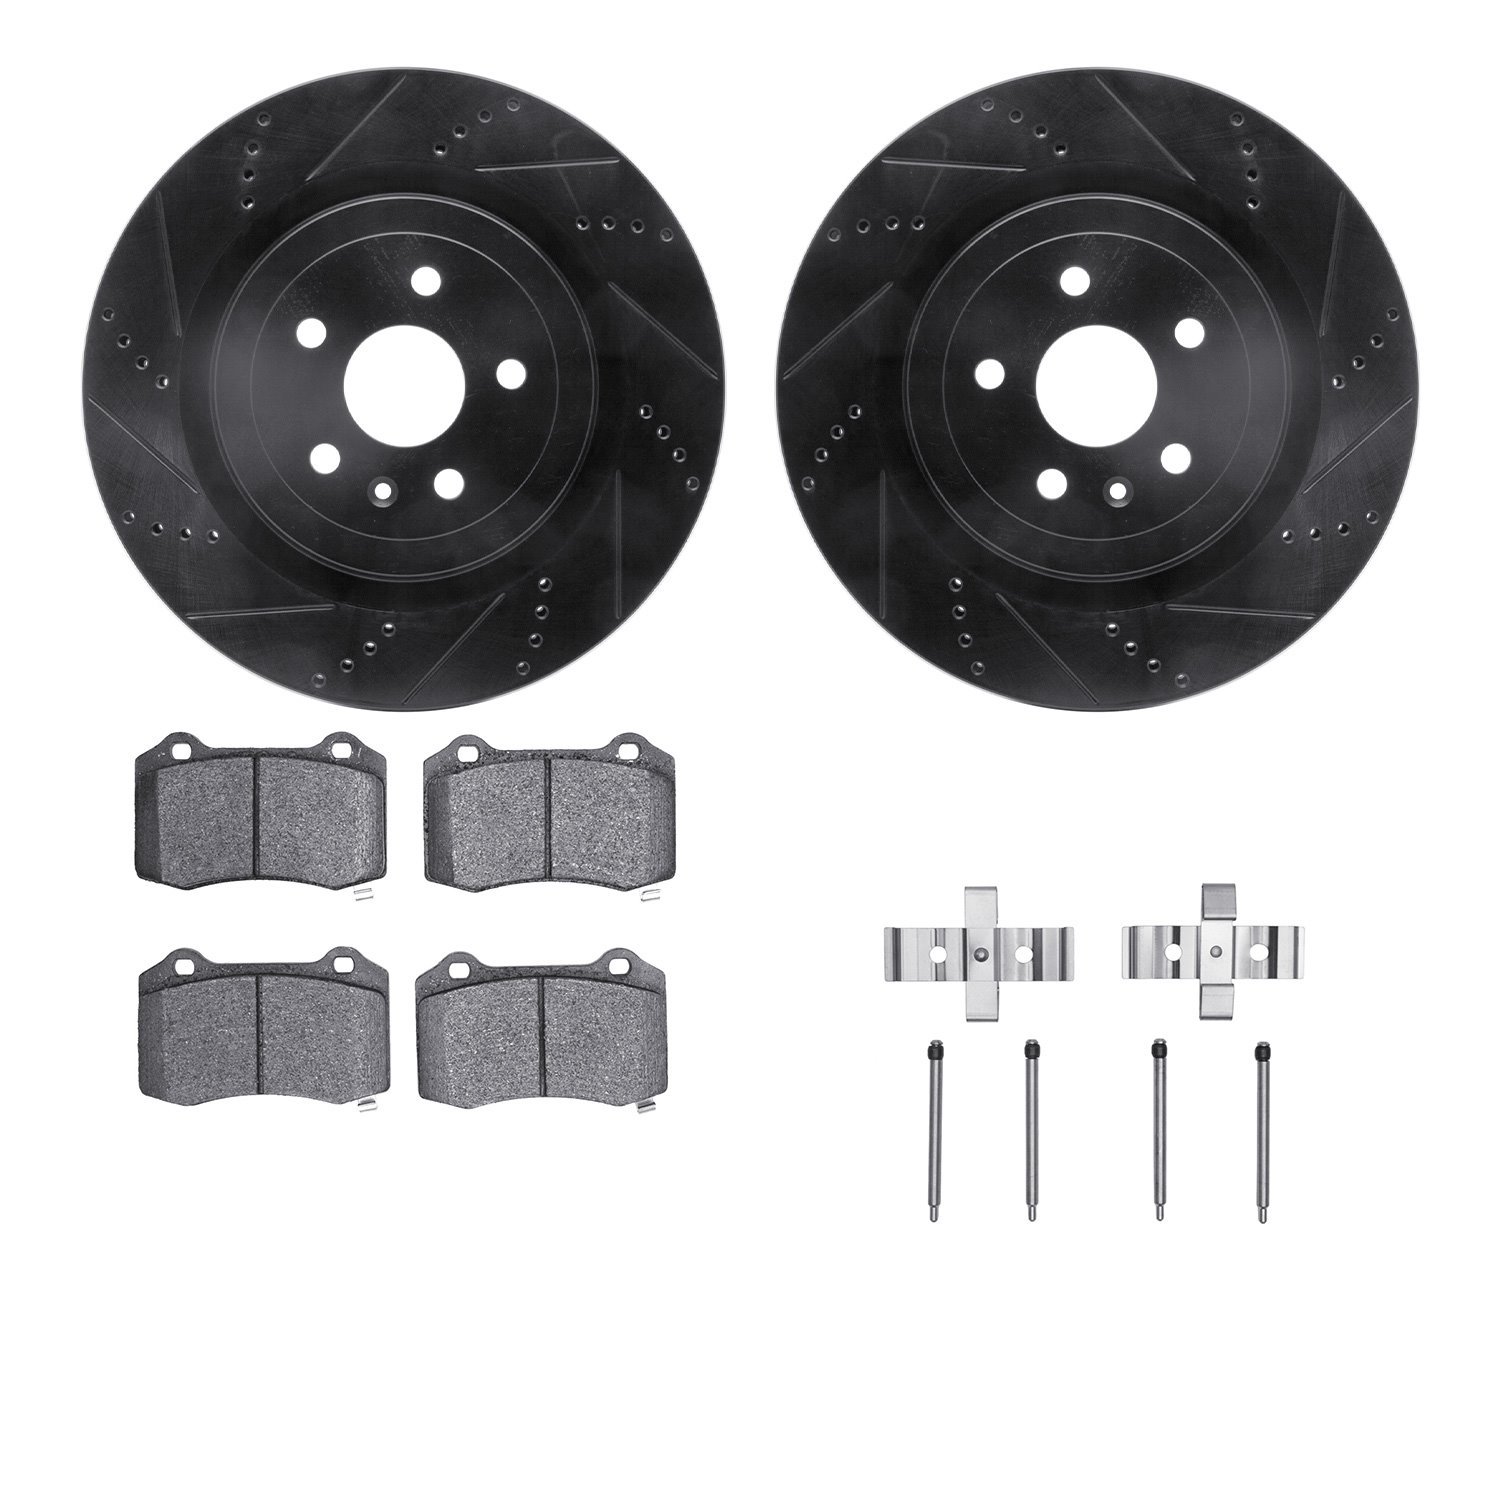 8312-47054 Drilled/Slotted Brake Rotors with 3000-Series Ceramic Brake Pads Kit & Hardware [Black], Fits Select GM, Position: Re